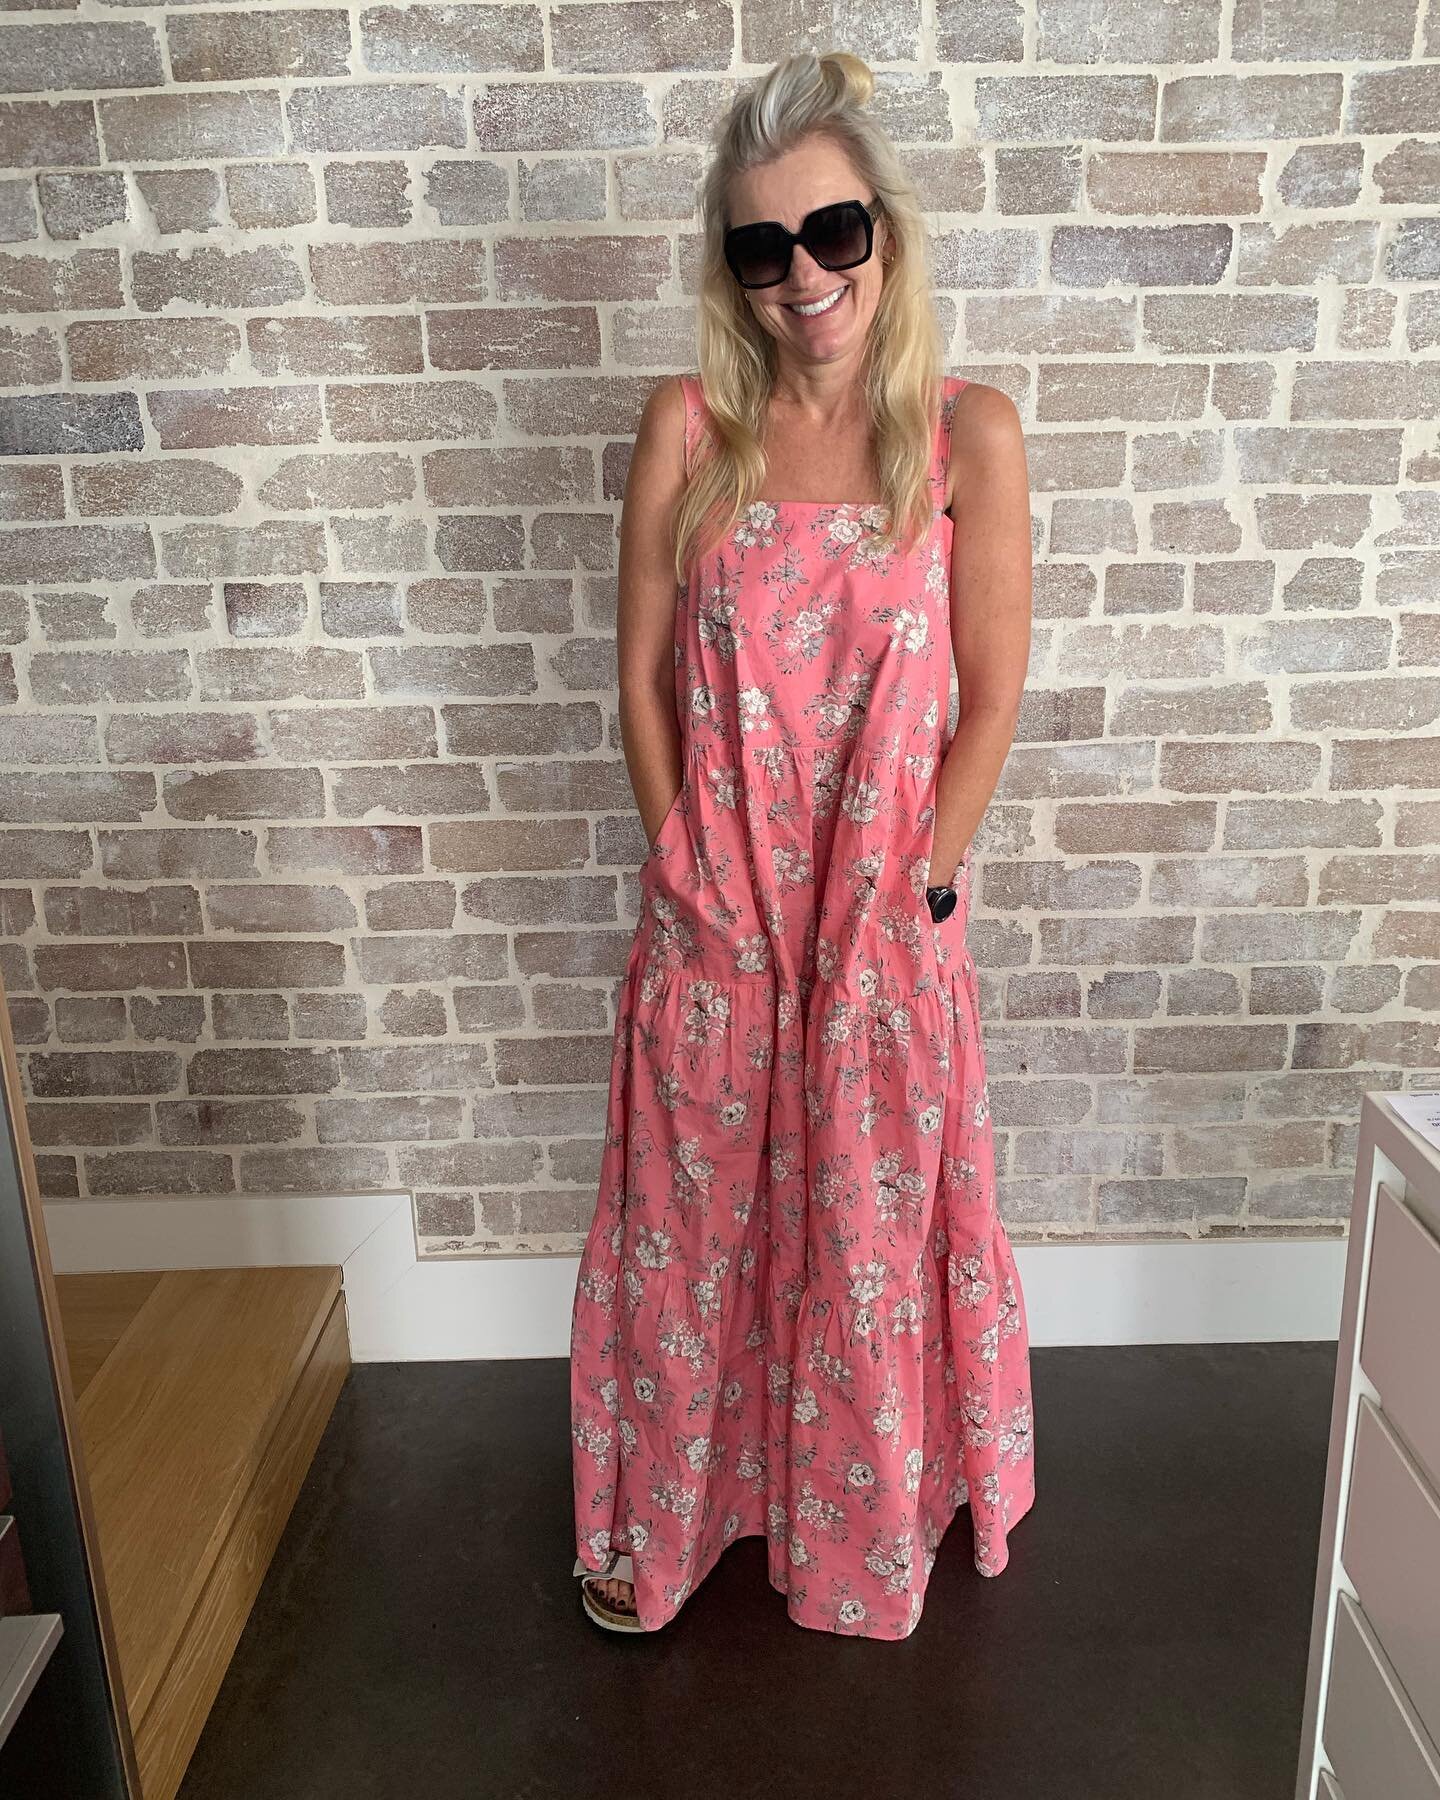 I&rsquo;m hoping the bright frock distracts from the greys 🌸🌸🌸 While I cannot wait for hairdressers (and nail bars and beauticians) to reopen soon 🙌🏼 I&rsquo;m very happy to have had my first pedicure in a very long time, thank you @rosiedonnola